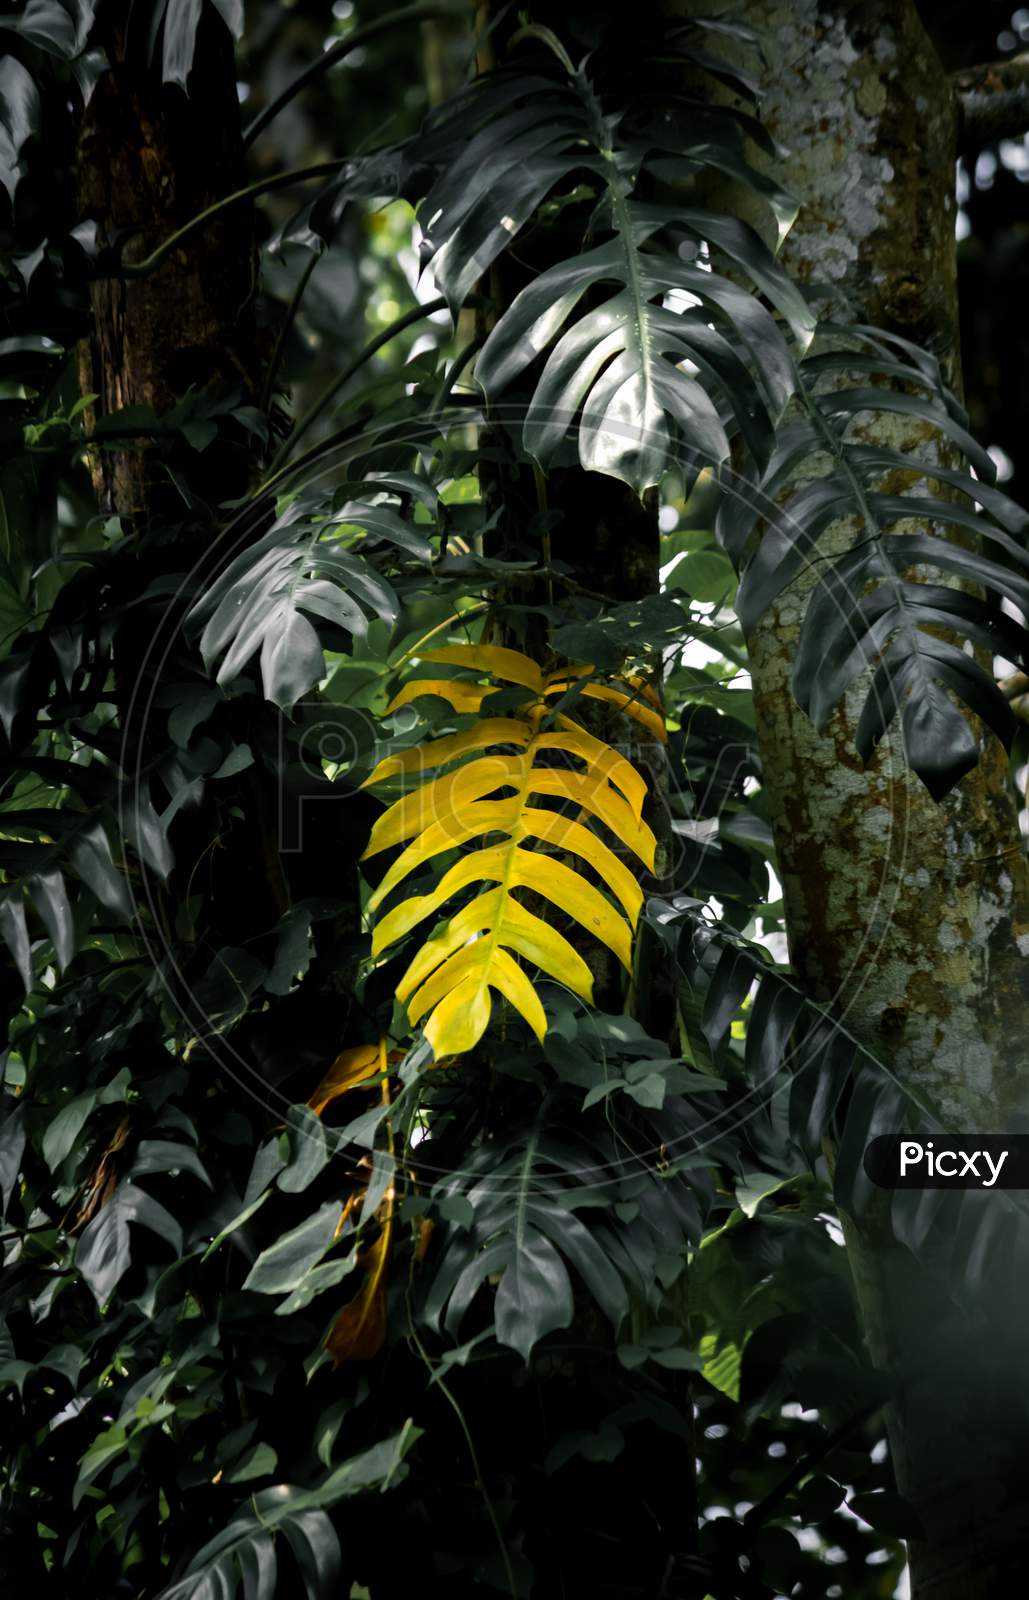 Big Yellow Leaf Standing Out From The Rest Of The Other Leaves In The Jungle.